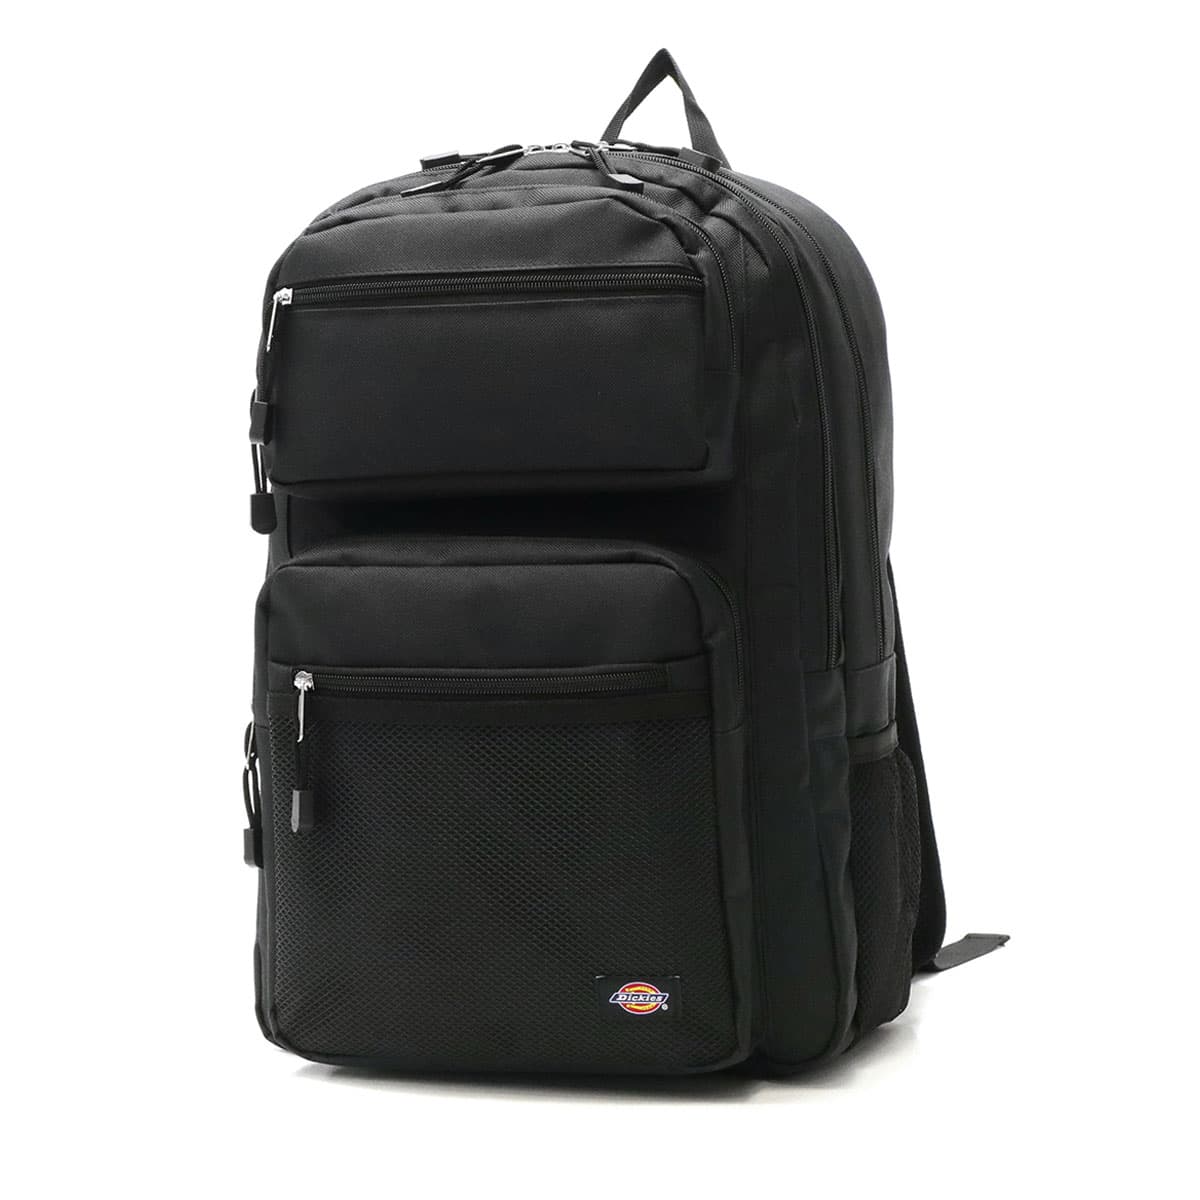 Dickies ディッキーズ 2 FRONT POCKET BACKPACK リュックサック